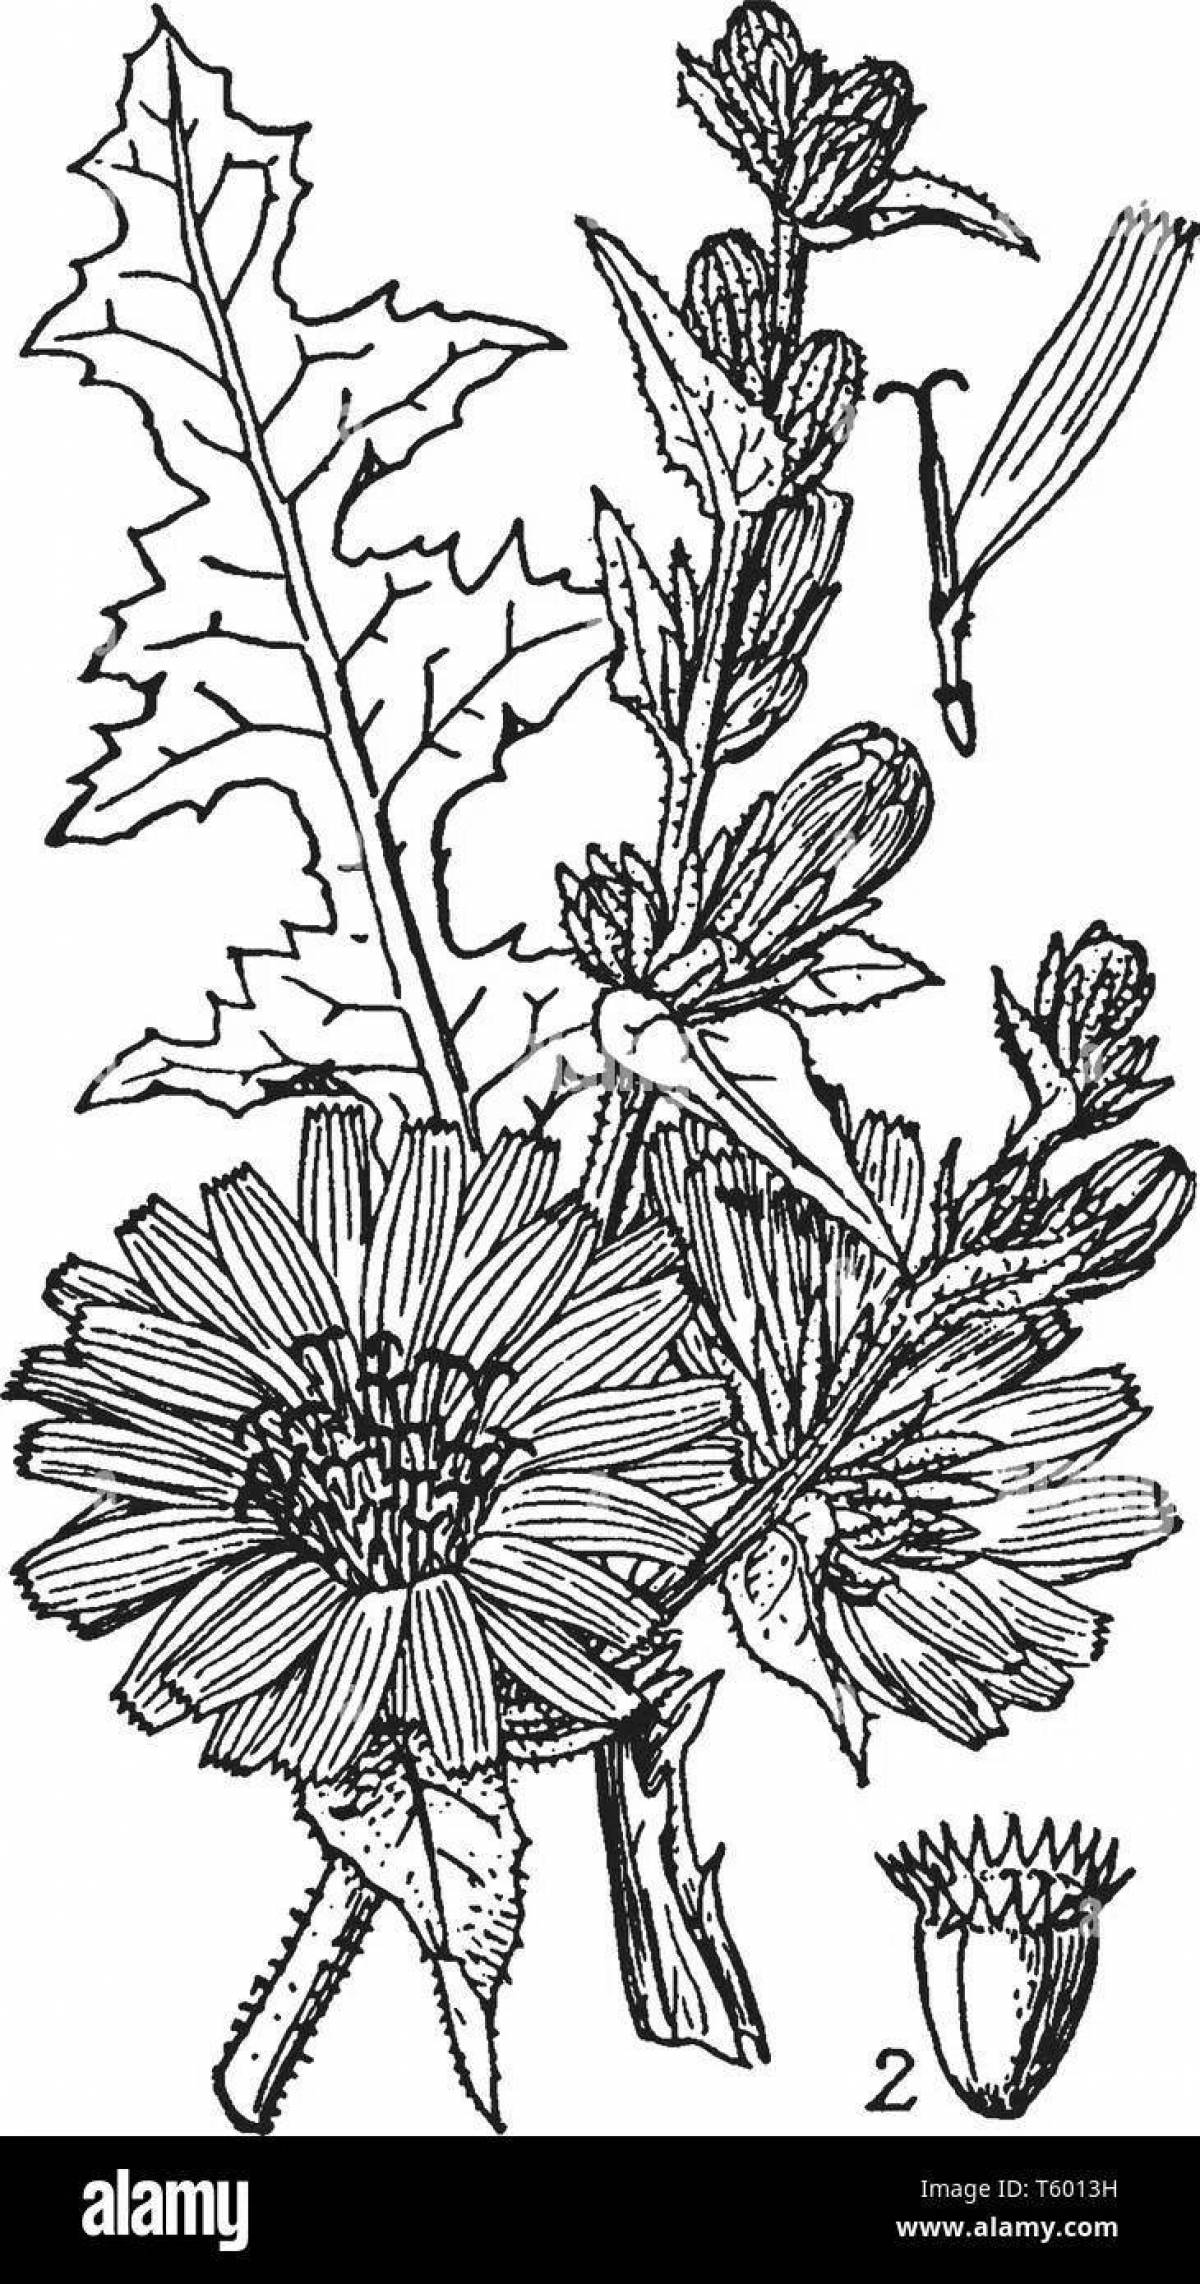 Coloring book shining chicory